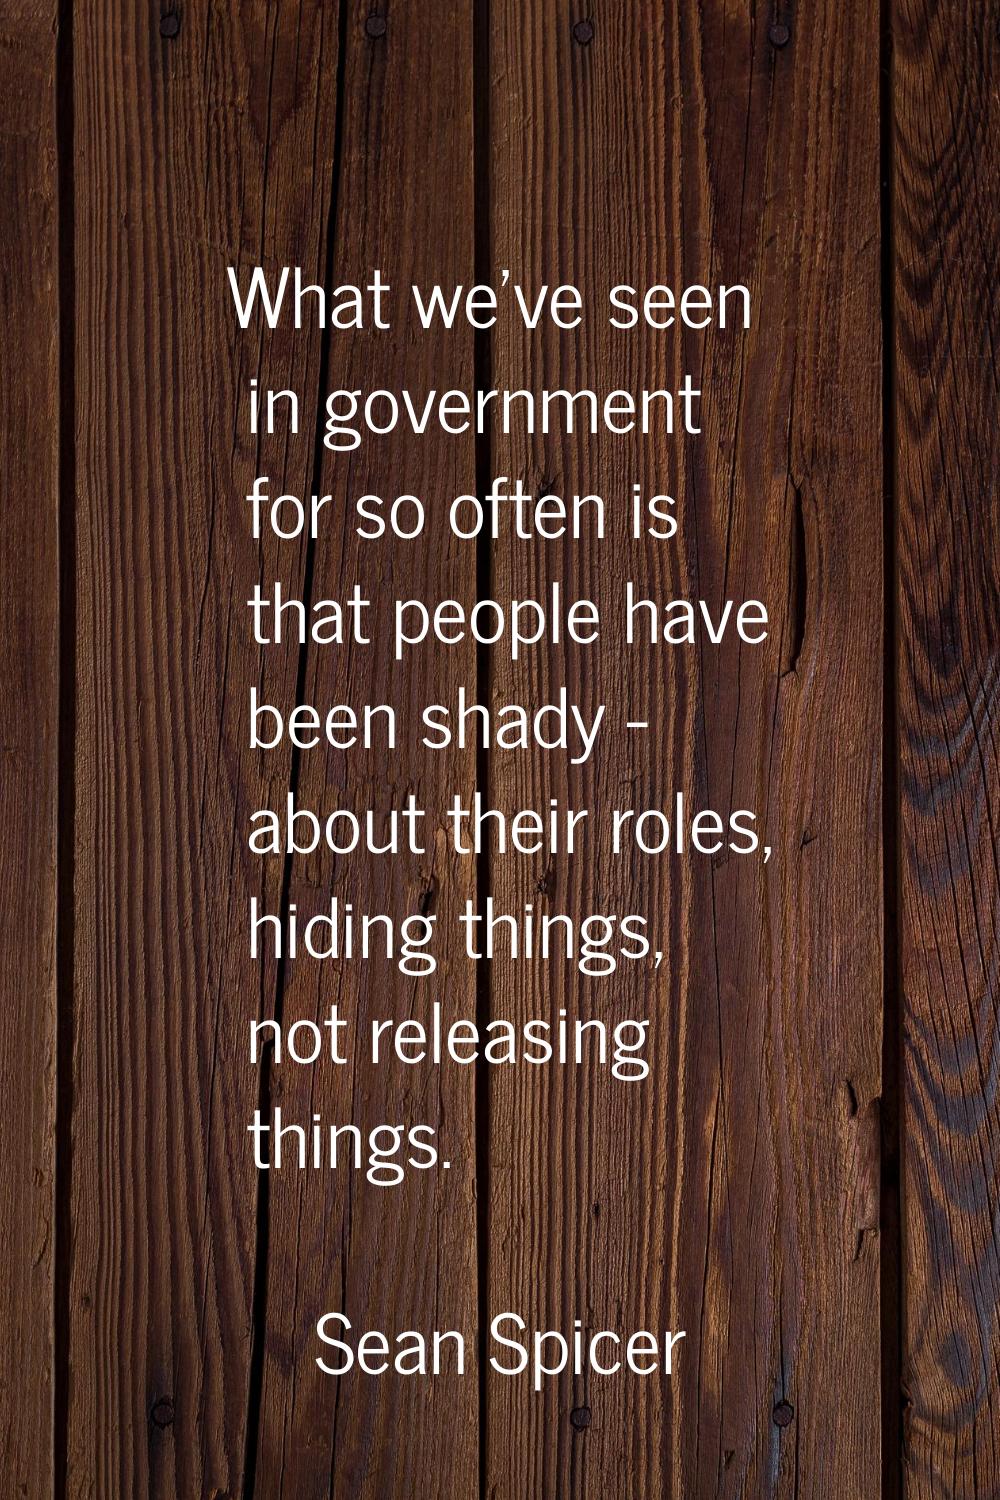 What we've seen in government for so often is that people have been shady - about their roles, hidi